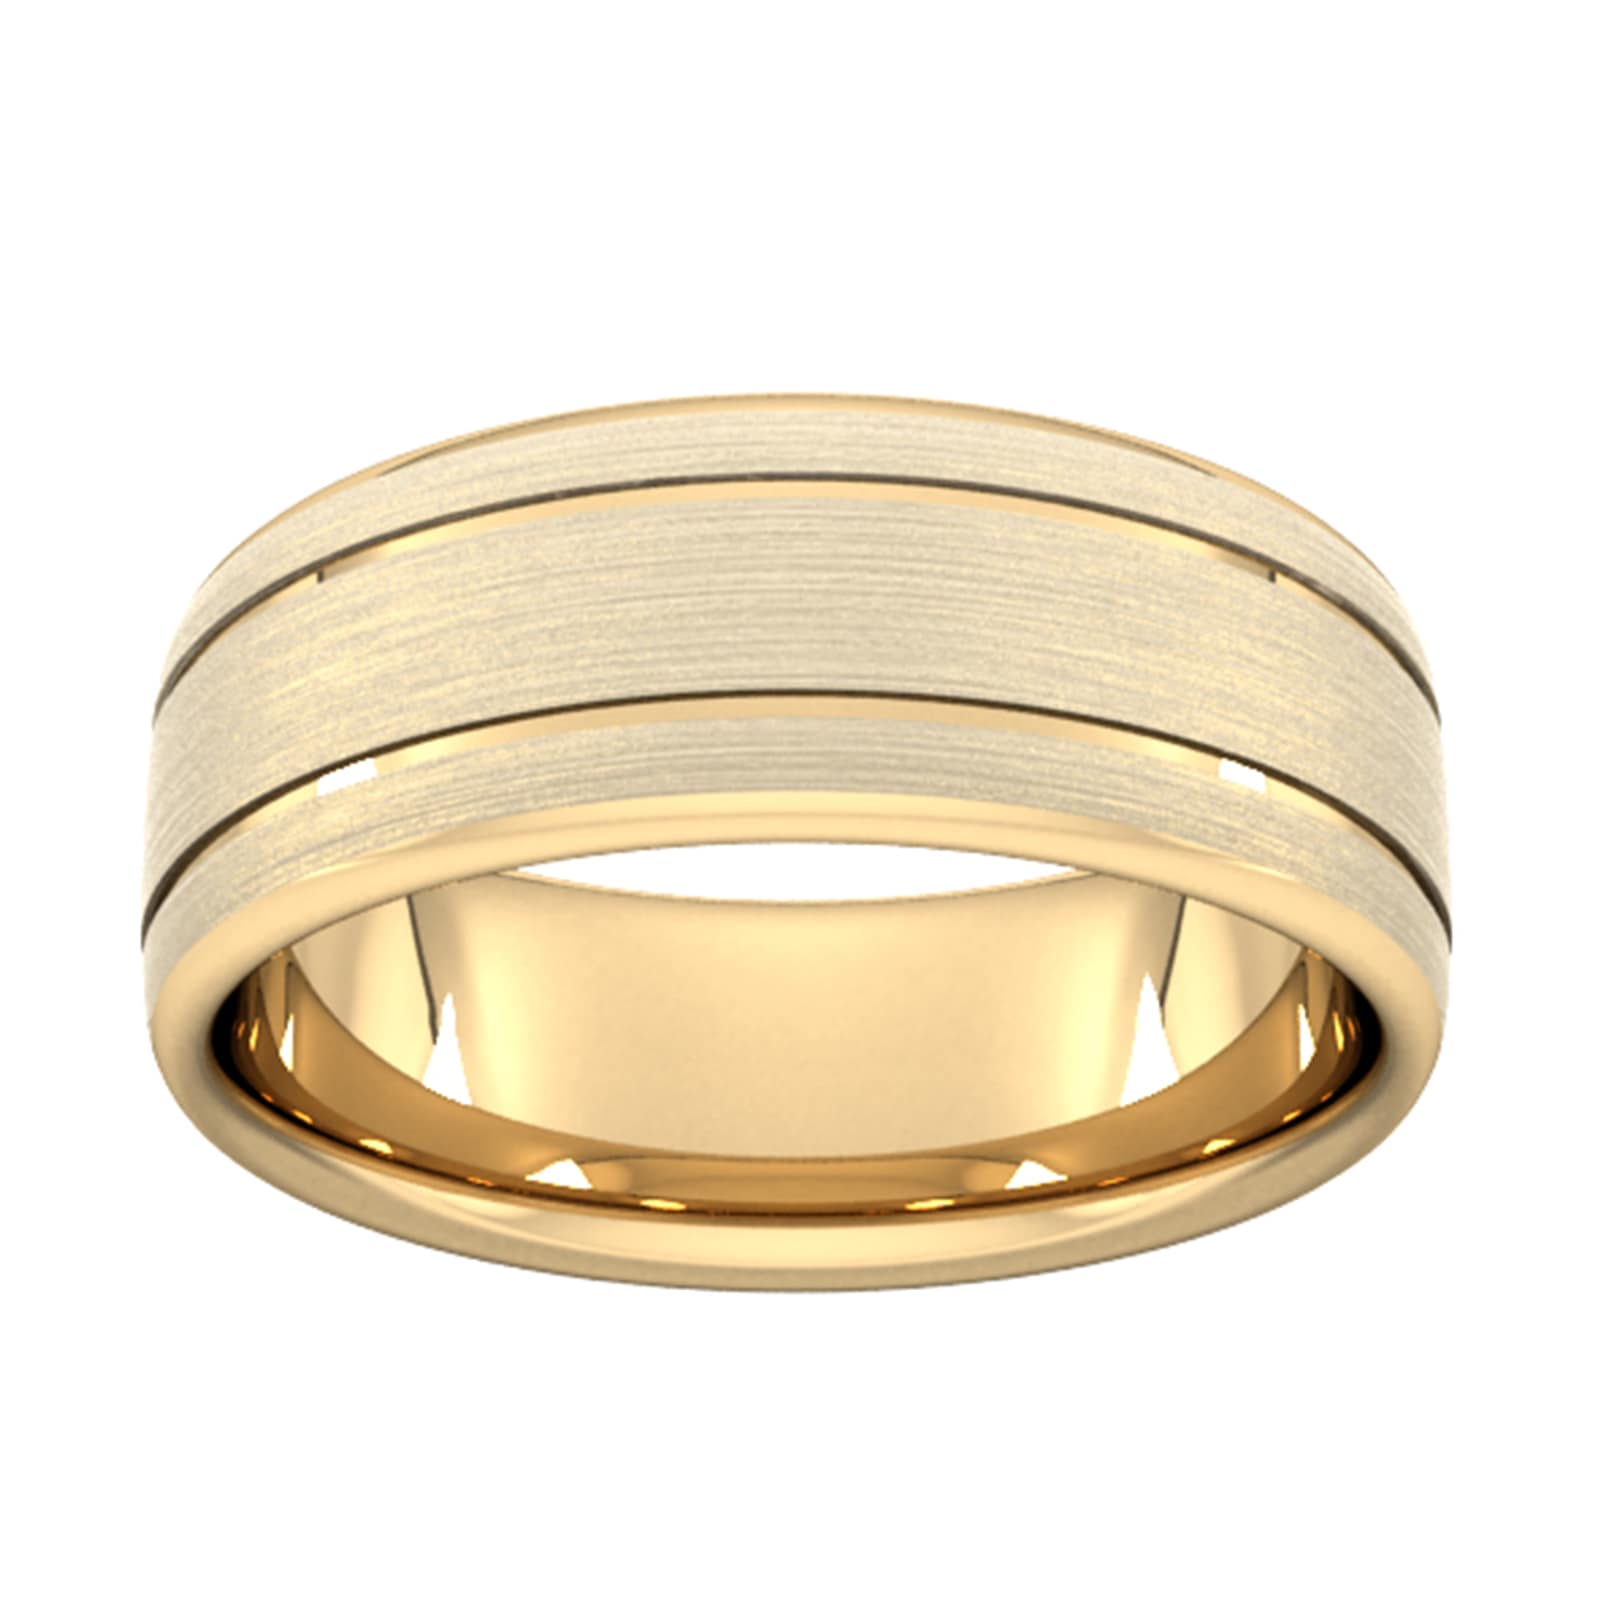 8mm D Shape Standard Matt Finish With Double Grooves Wedding Ring In 18 Carat Yellow Gold - Ring Size L